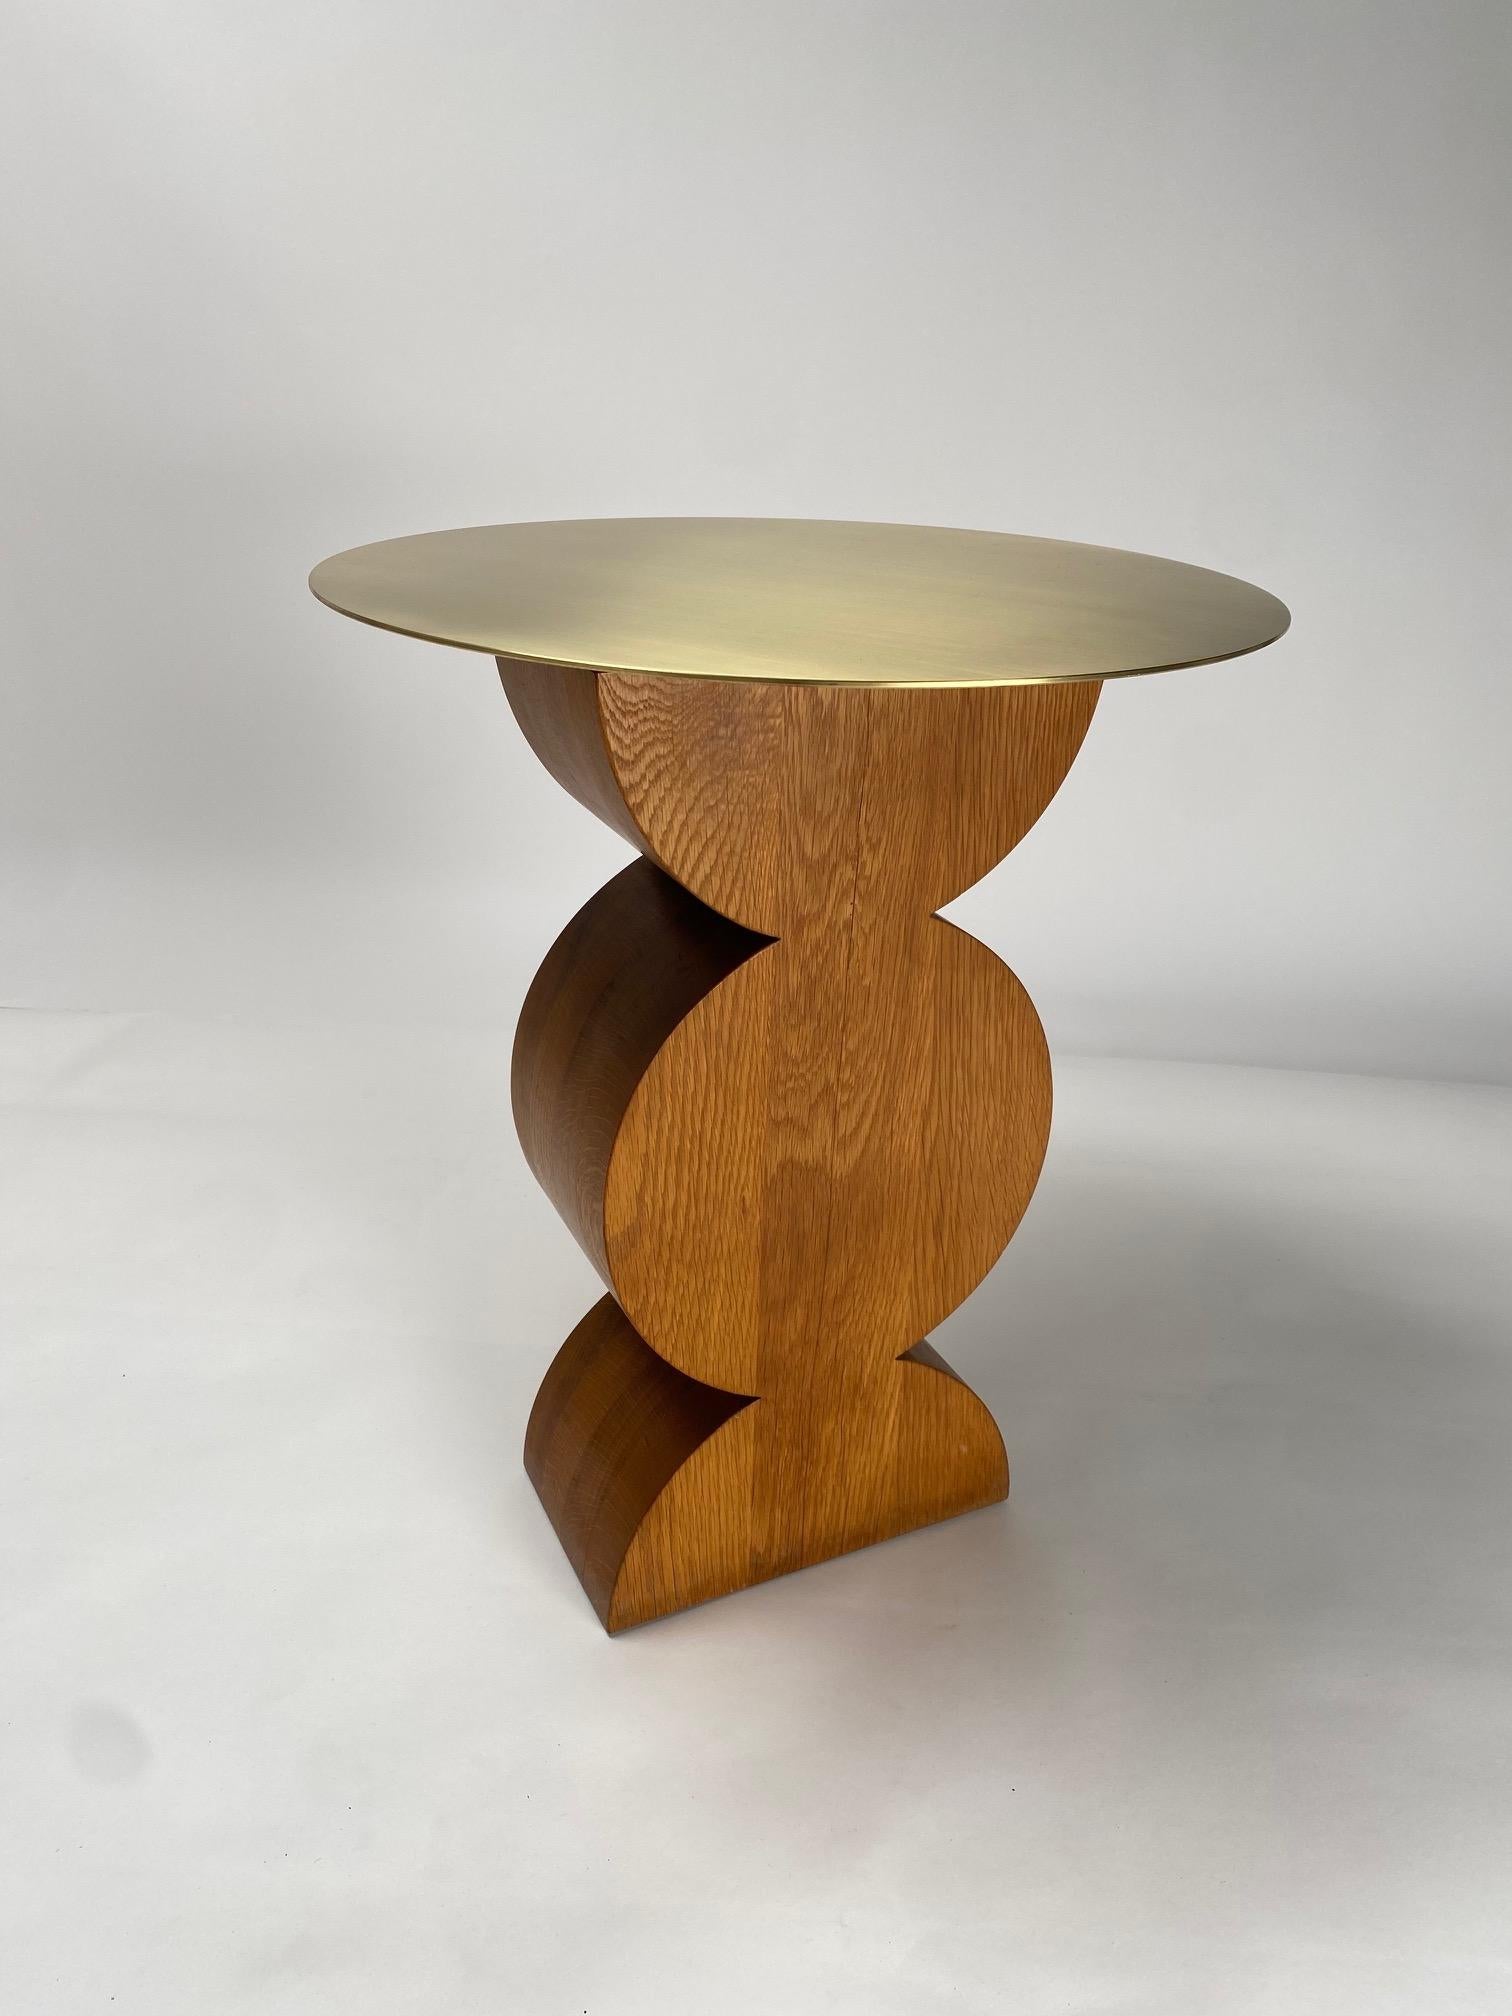 Constantin wood side table by Gavina, Homage to Brancusi, 1971 (First Edition) For Sale 3